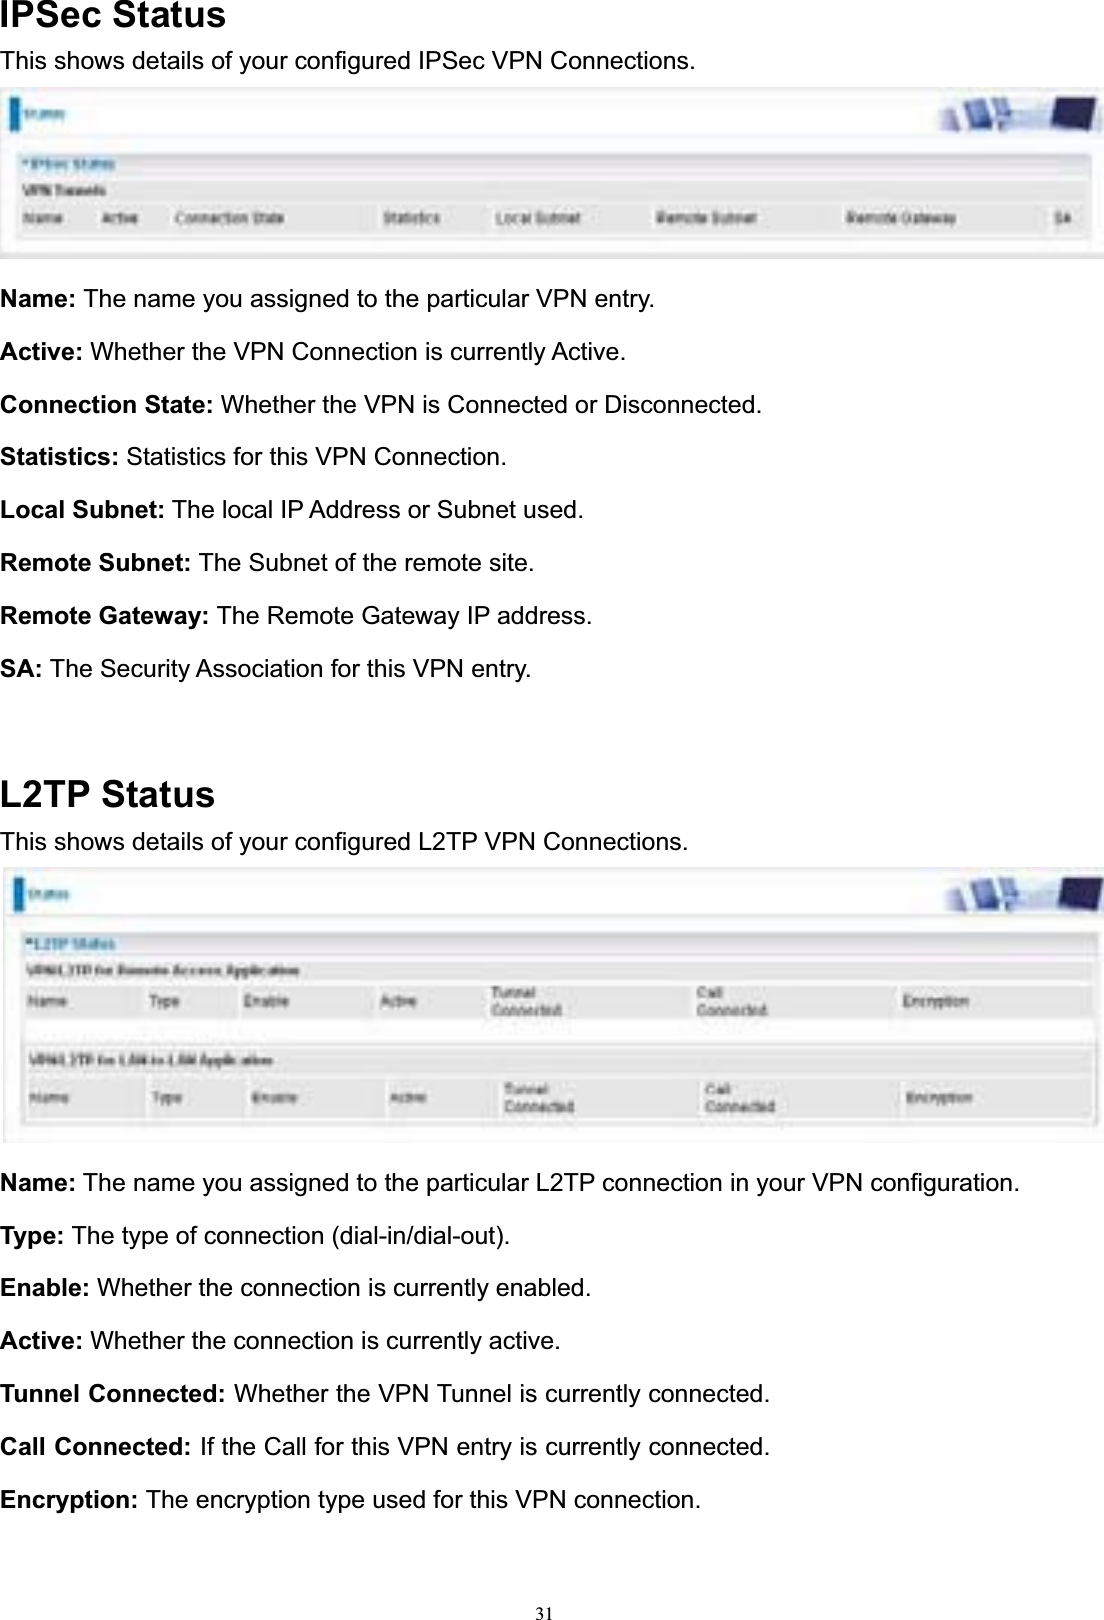 31IPSec StatusThis shows details of your configured IPSec VPN Connections. Name: The name you assigned to the particular VPN entry. Active: Whether the VPN Connection is currently Active. Connection State: Whether the VPN is Connected or Disconnected. Statistics: Statistics for this VPN Connection. Local Subnet: The local IP Address or Subnet used. Remote Subnet: The Subnet of the remote site. Remote Gateway: The Remote Gateway IP address. SA: The Security Association for this VPN entry. L2TP StatusThis shows details of your configured L2TP VPN Connections. Name: The name you assigned to the particular L2TP connection in your VPN configuration. Type: The type of connection (dial-in/dial-out). Enable: Whether the connection is currently enabled. Active: Whether the connection is currently active. Tunnel Connected: Whether the VPN Tunnel is currently connected. Call Connected: If the Call for this VPN entry is currently connected. Encryption: The encryption type used for this VPN connection. 